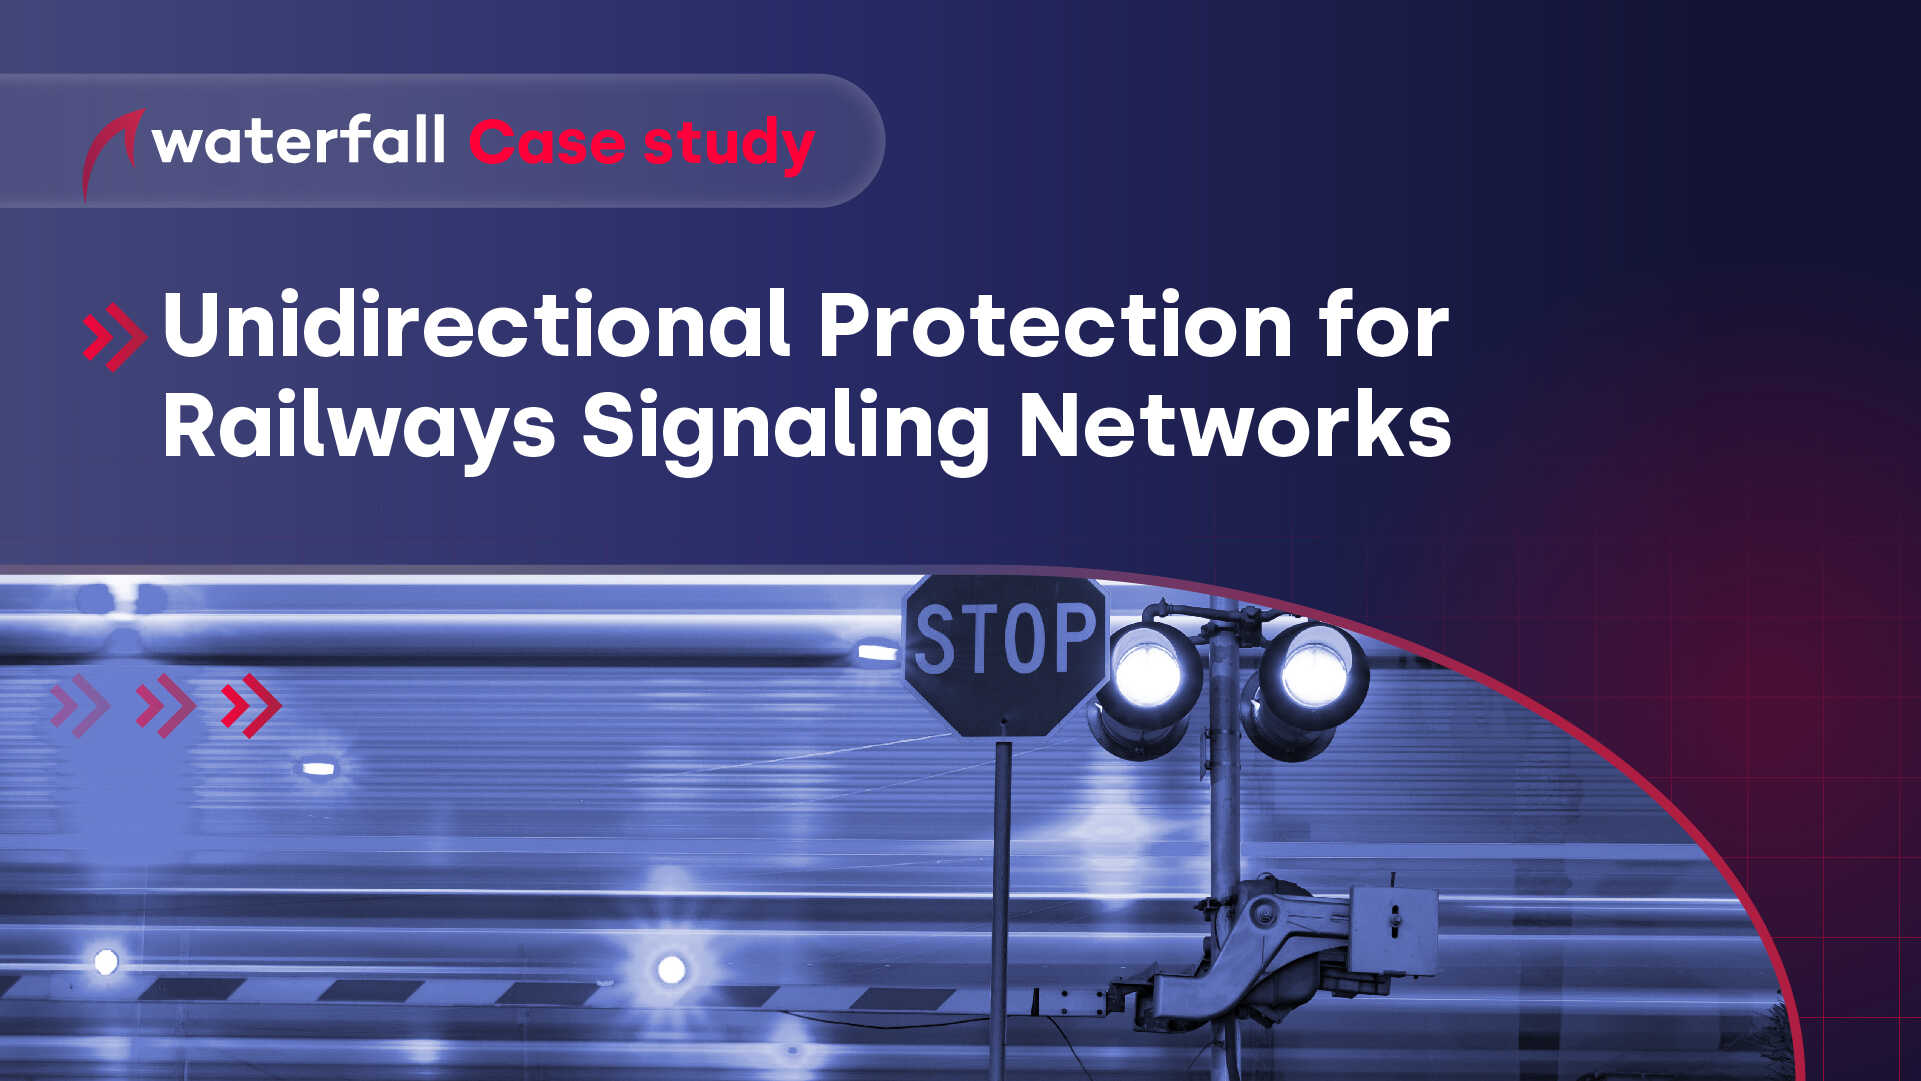 Unidirectional Protection For Railway Signaling Networks